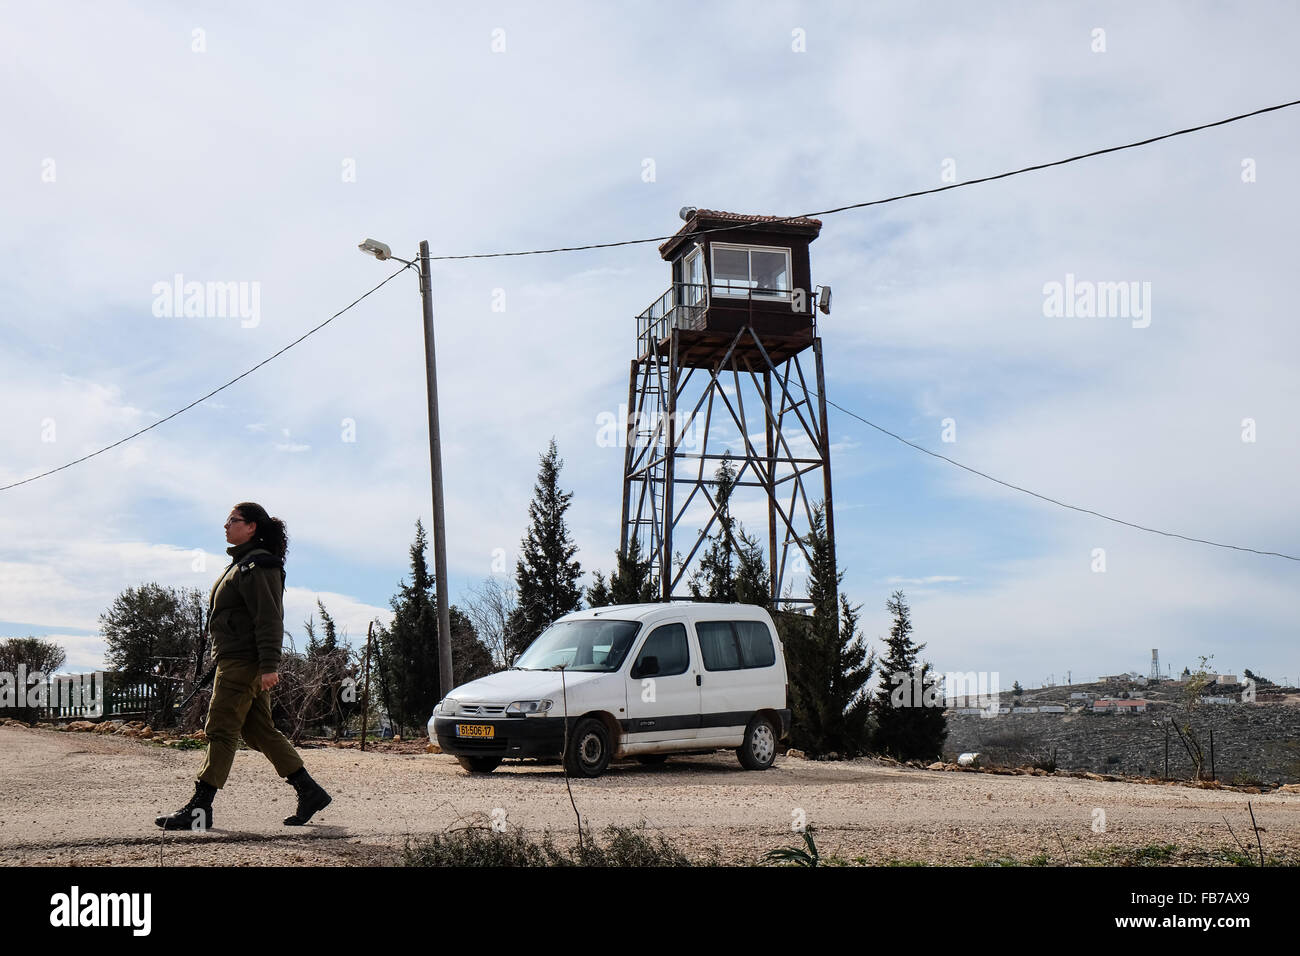 Esh Kodesh, West Bank. 11th January, 2016. An IDF officer walks past the guard tower in the Esh Kodesh Israeli outpost in the West Bank near Shilo, under the jurisdiction of the Mateh Binyamin Regional Council. The guard tower manned by IDF soldiers is visible in the background. The settlement was established in 1999 and is now home to some 40 families who consider it an unauthorized community of Shilo in the process of becoming formally authorized. Stock Photo